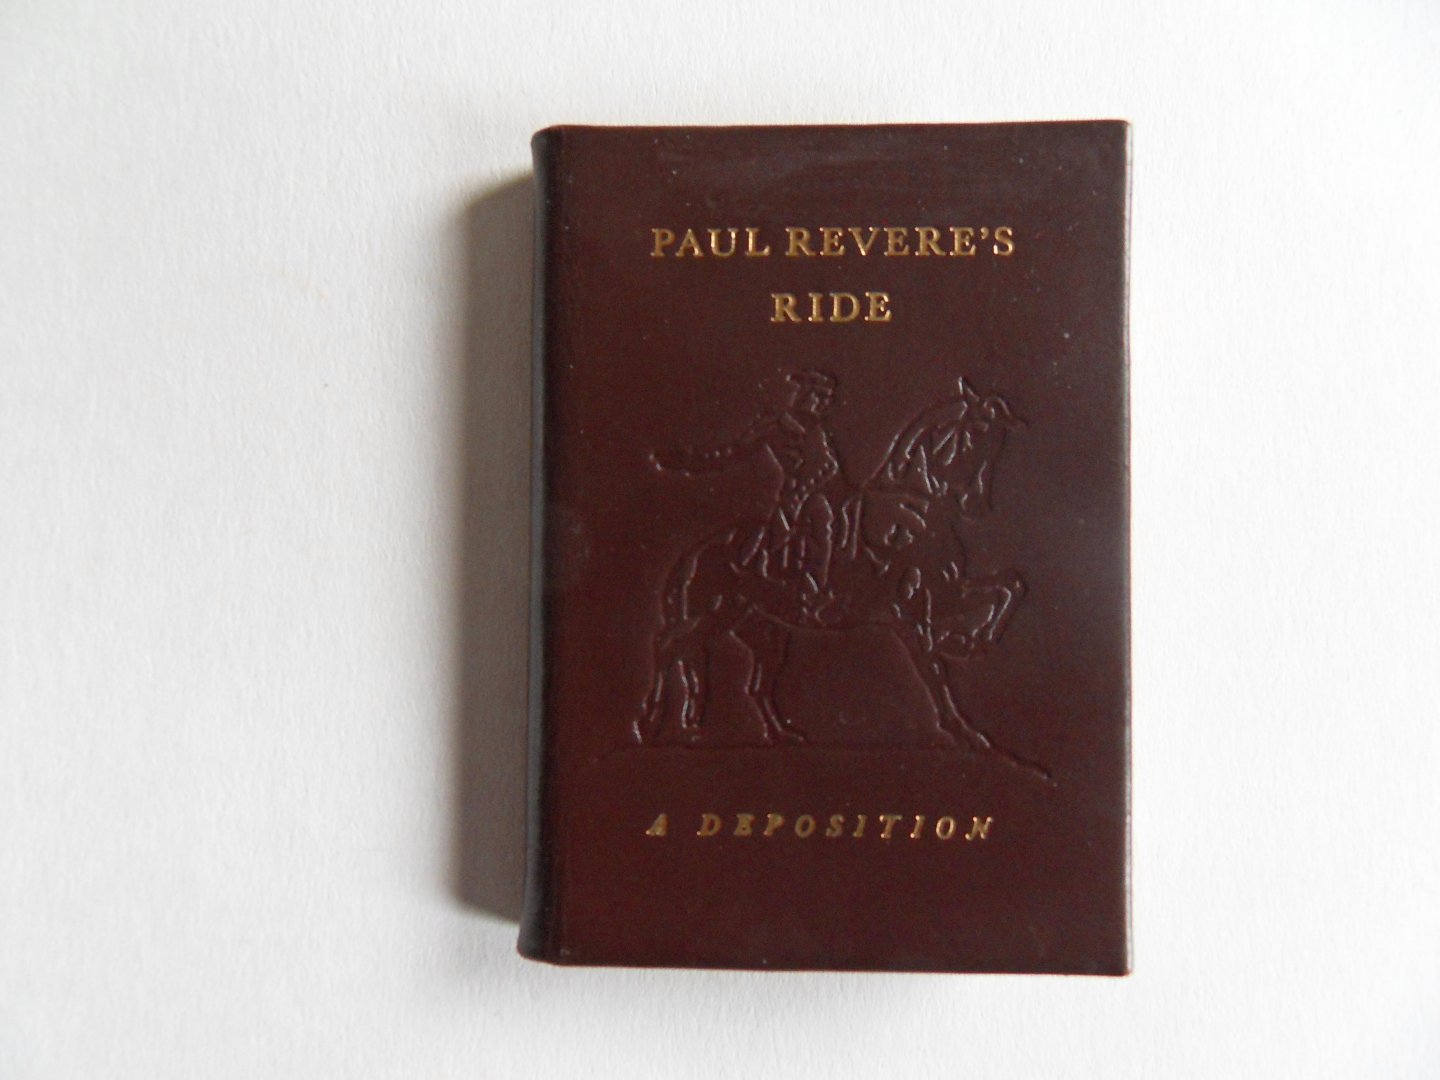 Forbes, Esther [ introduction ]. - Paul Revere`s Ride. - A Deposition. -The personal account by Revere of his famous ride. [ Oplage van 1000 exemplaren - 1000 copies only ].